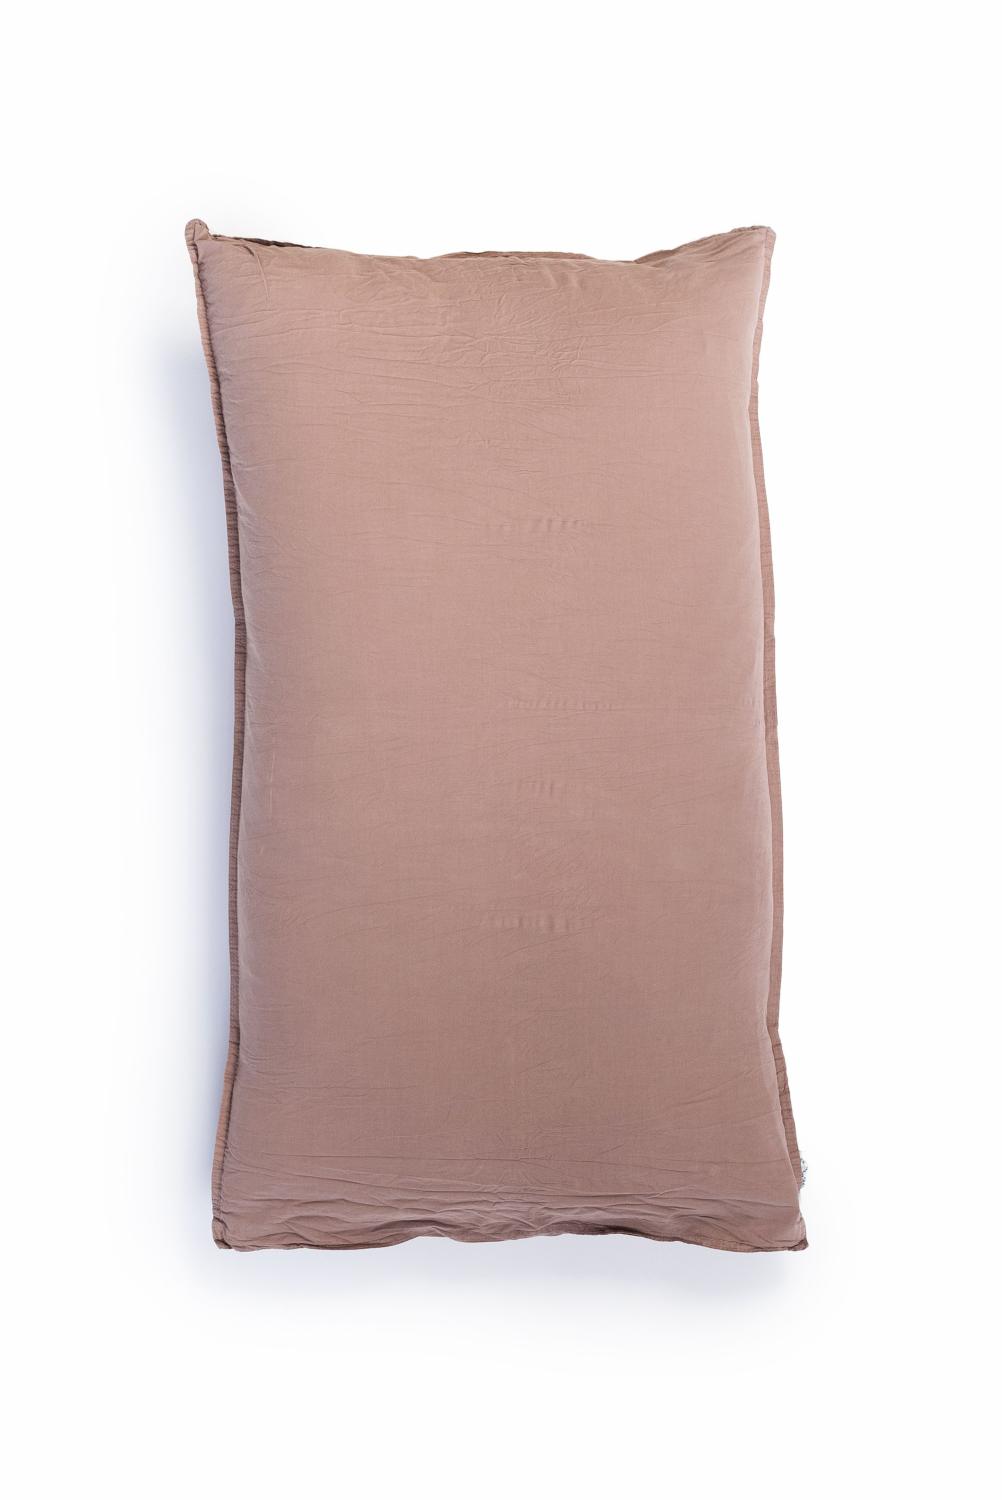 50x90cm Pillowcase Crinkle Rose Taupe